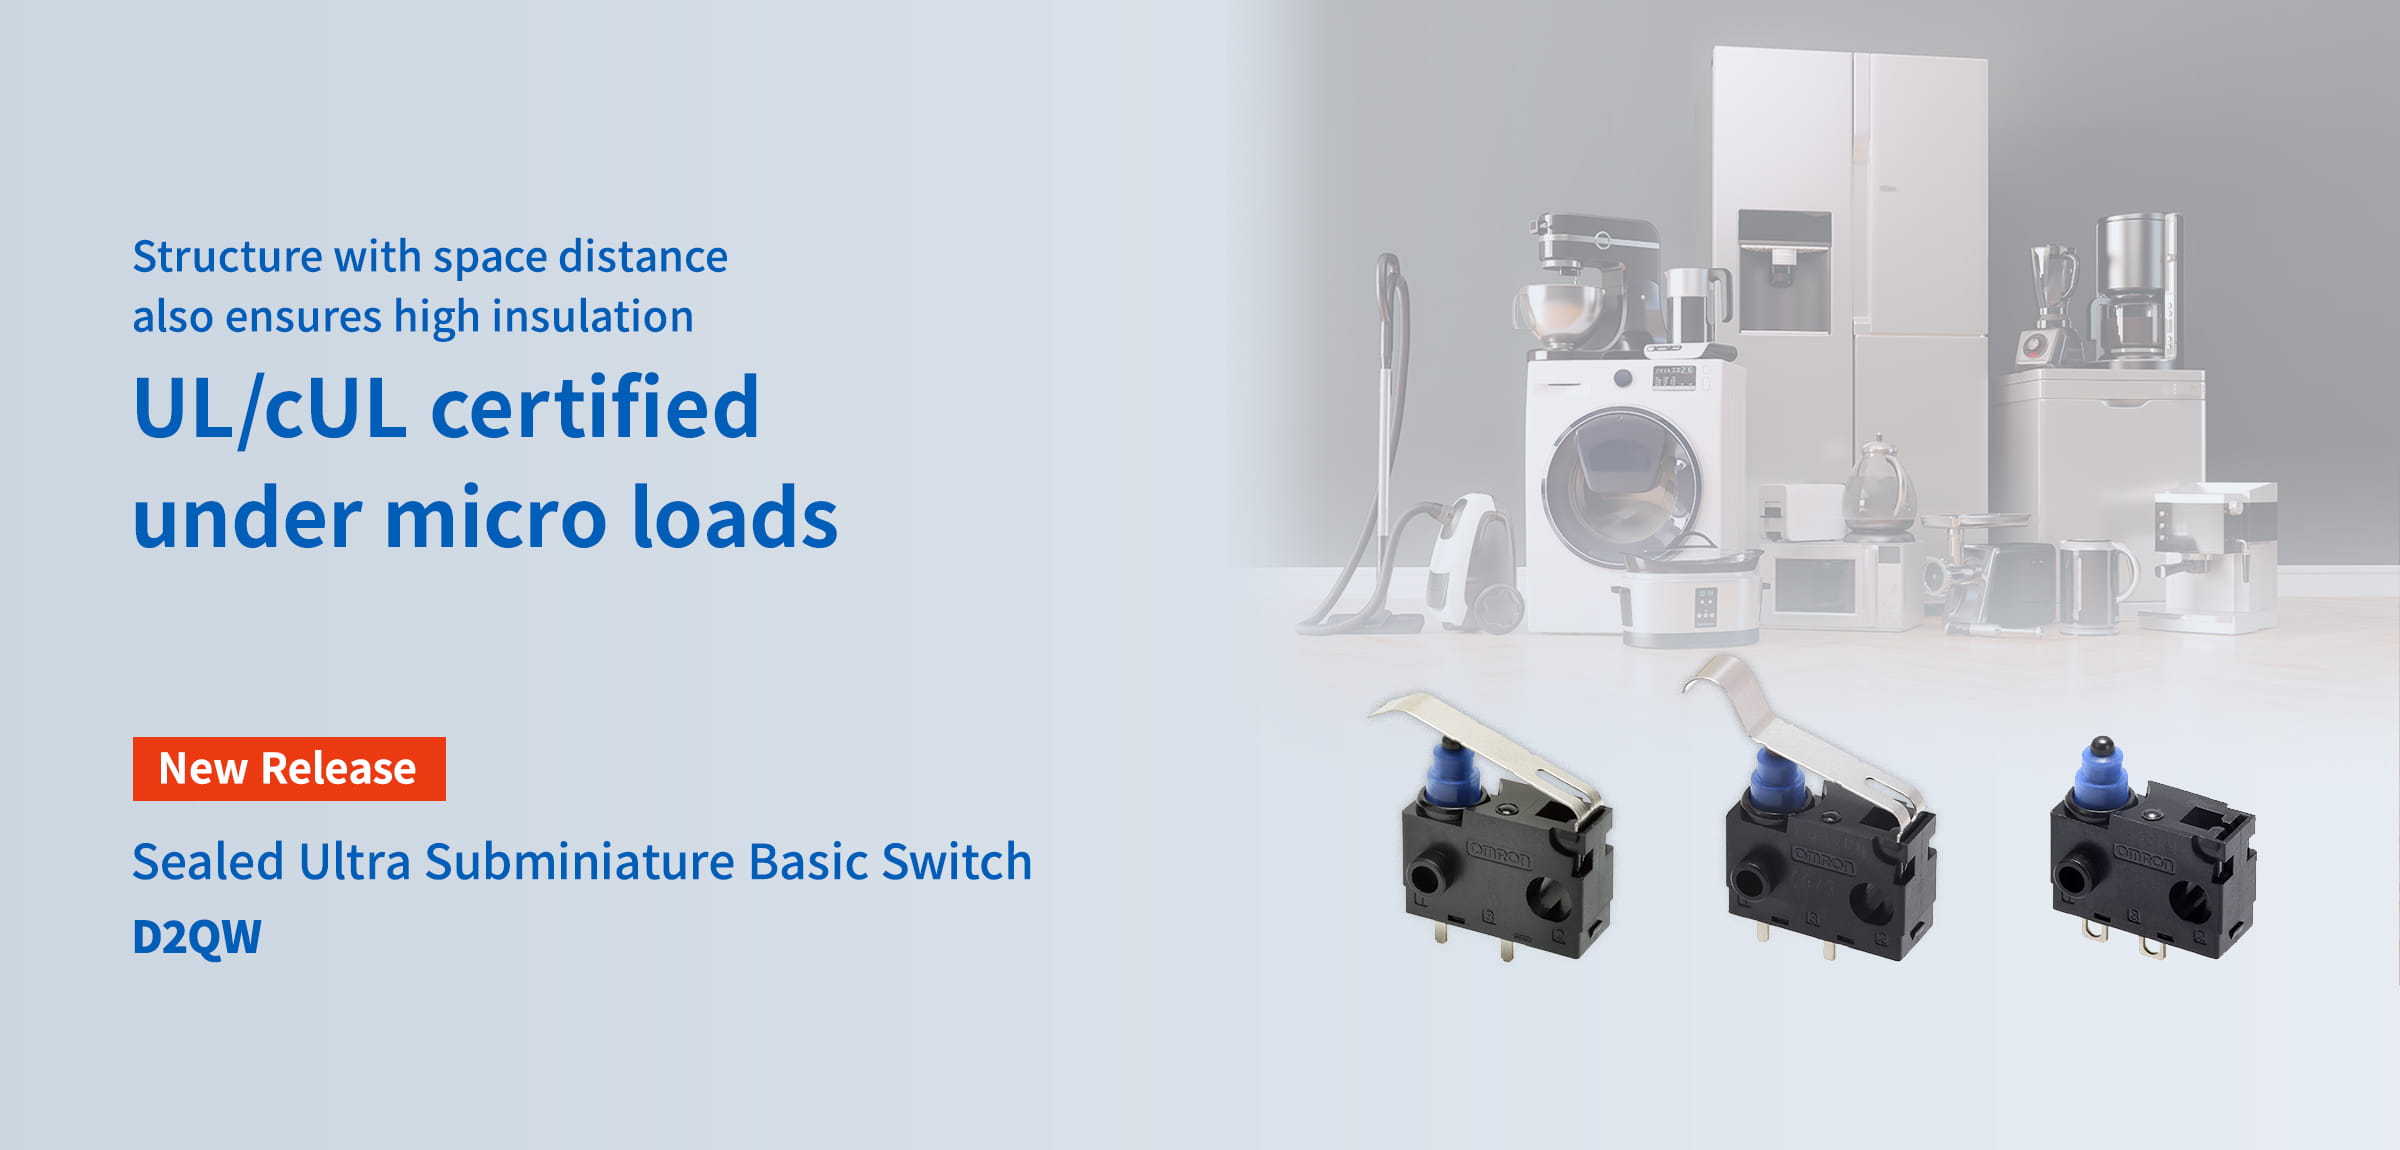 Structure with space distance also ensures high insulation UL/cUL certified under micro loads [New Release] Sealed Ultra Subminiature Basic Switch D2QW